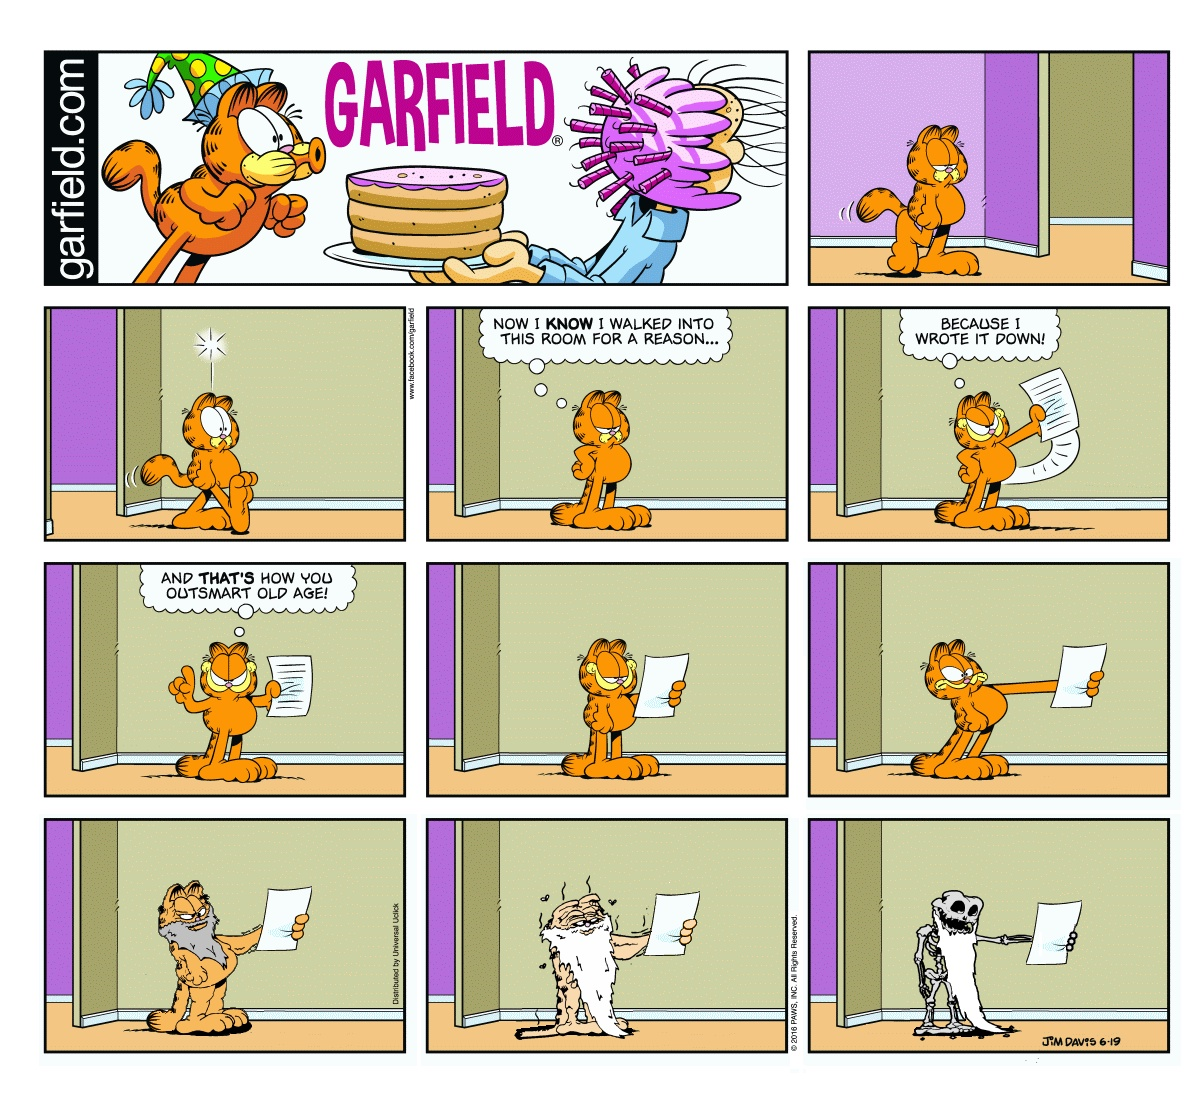 Garfield plus the Inevitable Passing of Time